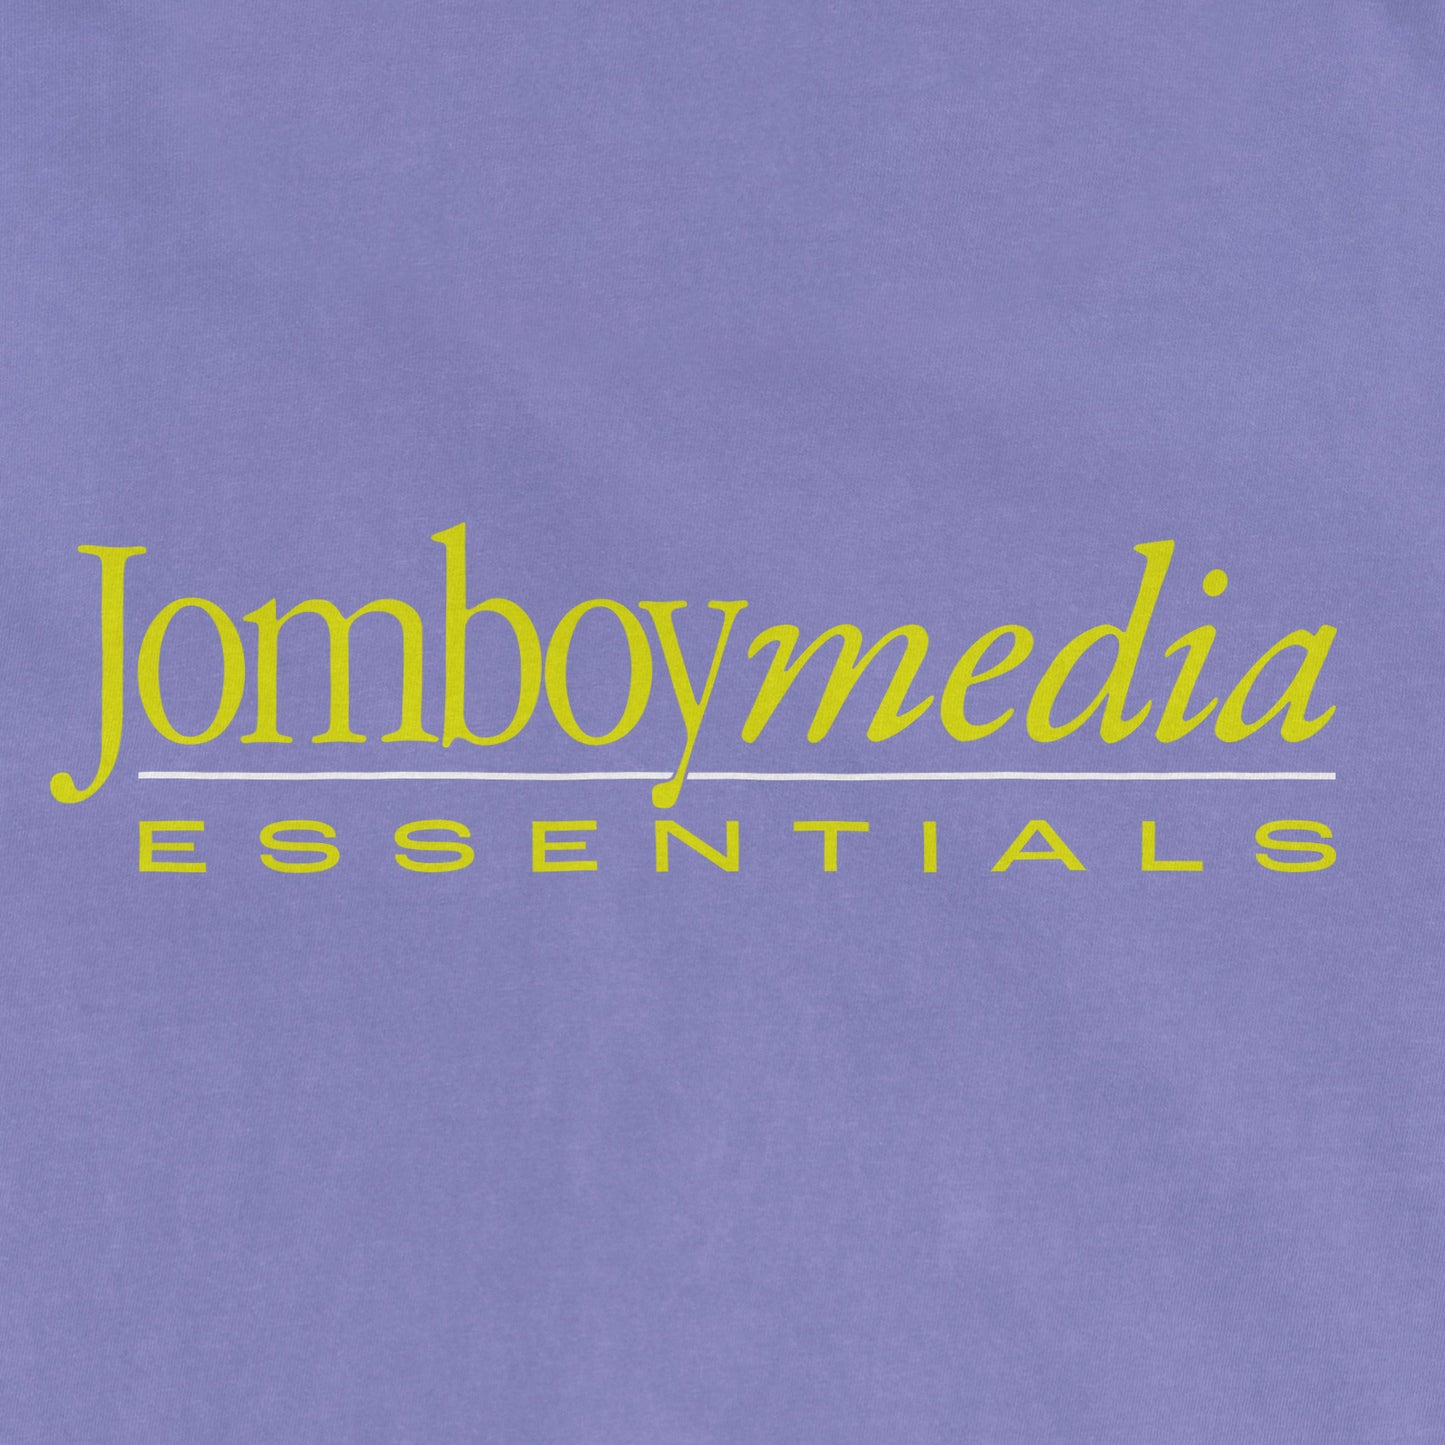 The '80s Essential | Comfort Colors® Vintage Tee